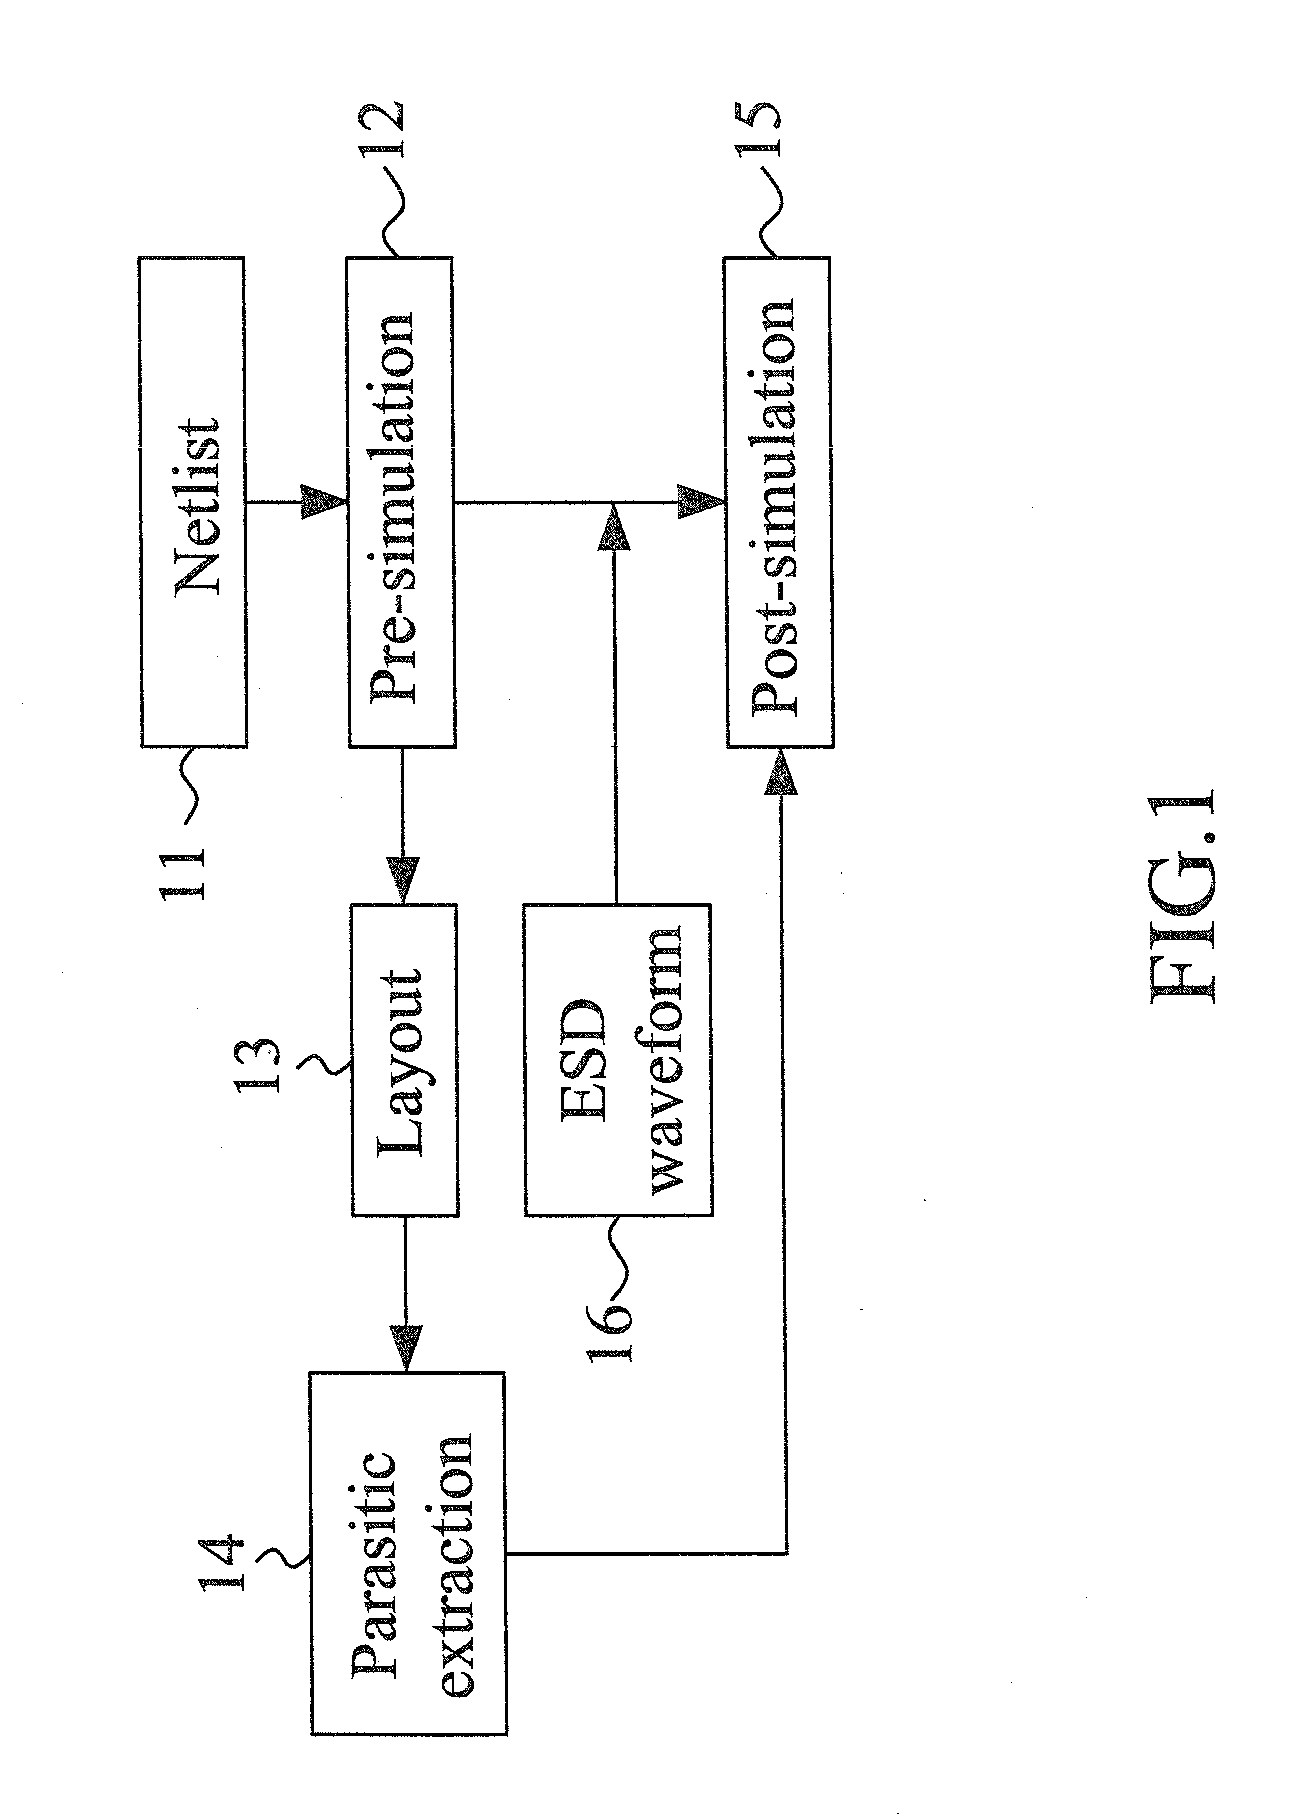 Method of simulating an ESD circuit layout